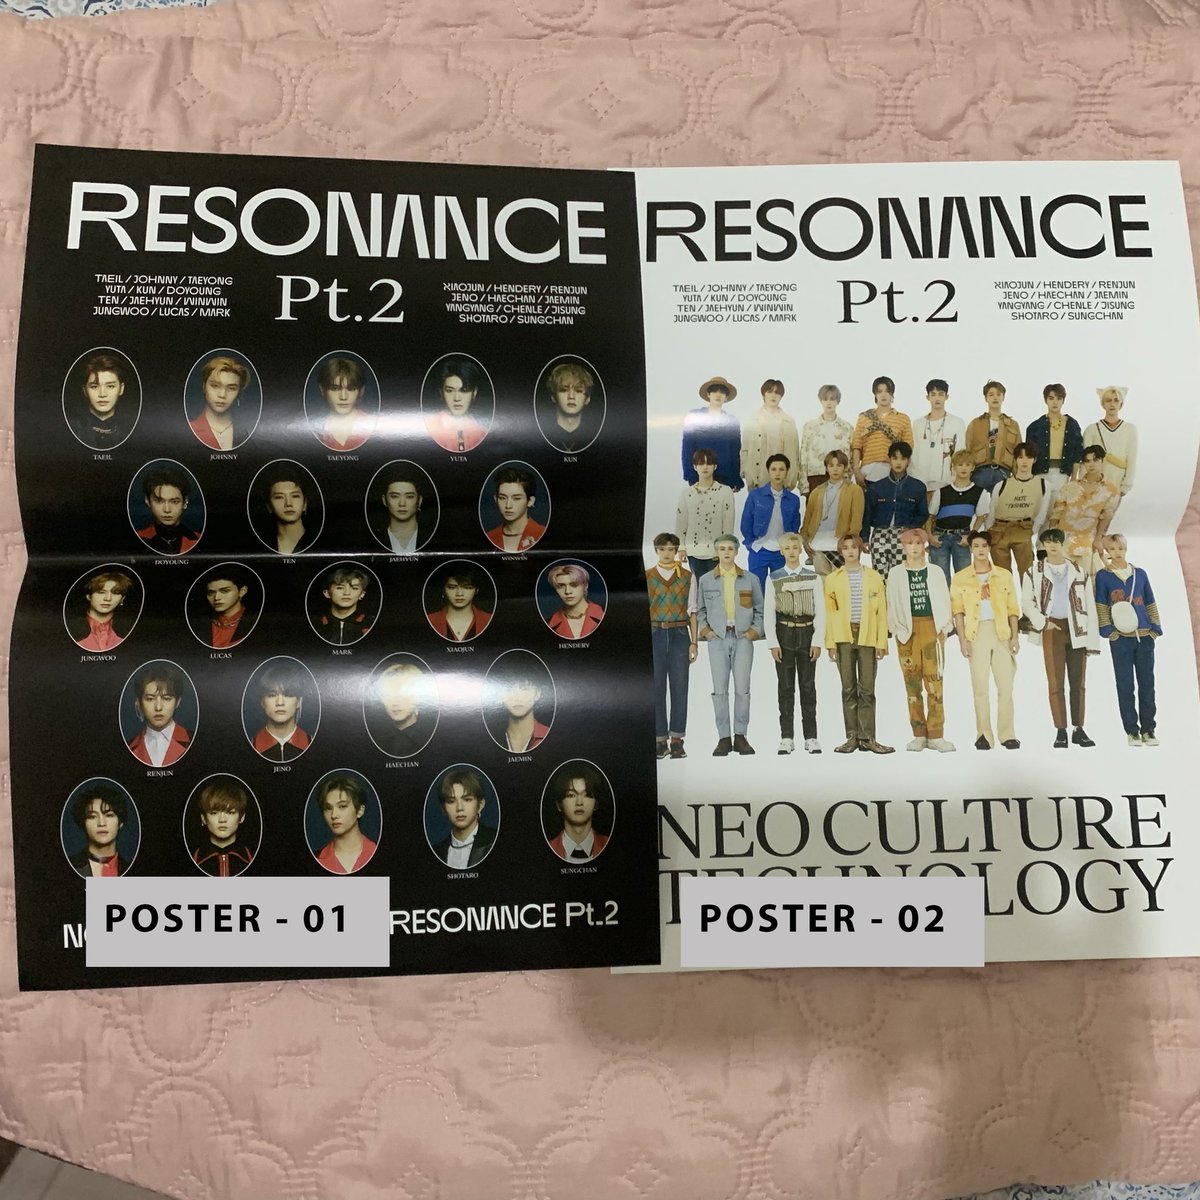 wts lfb ph on hand exo nct rv superm sf9 pc unsealed album postcard posterReply with “mine + code”, or “mine for (@/username) + code”chenle nct 2020 id card unsealed album poster resonance departure arrival